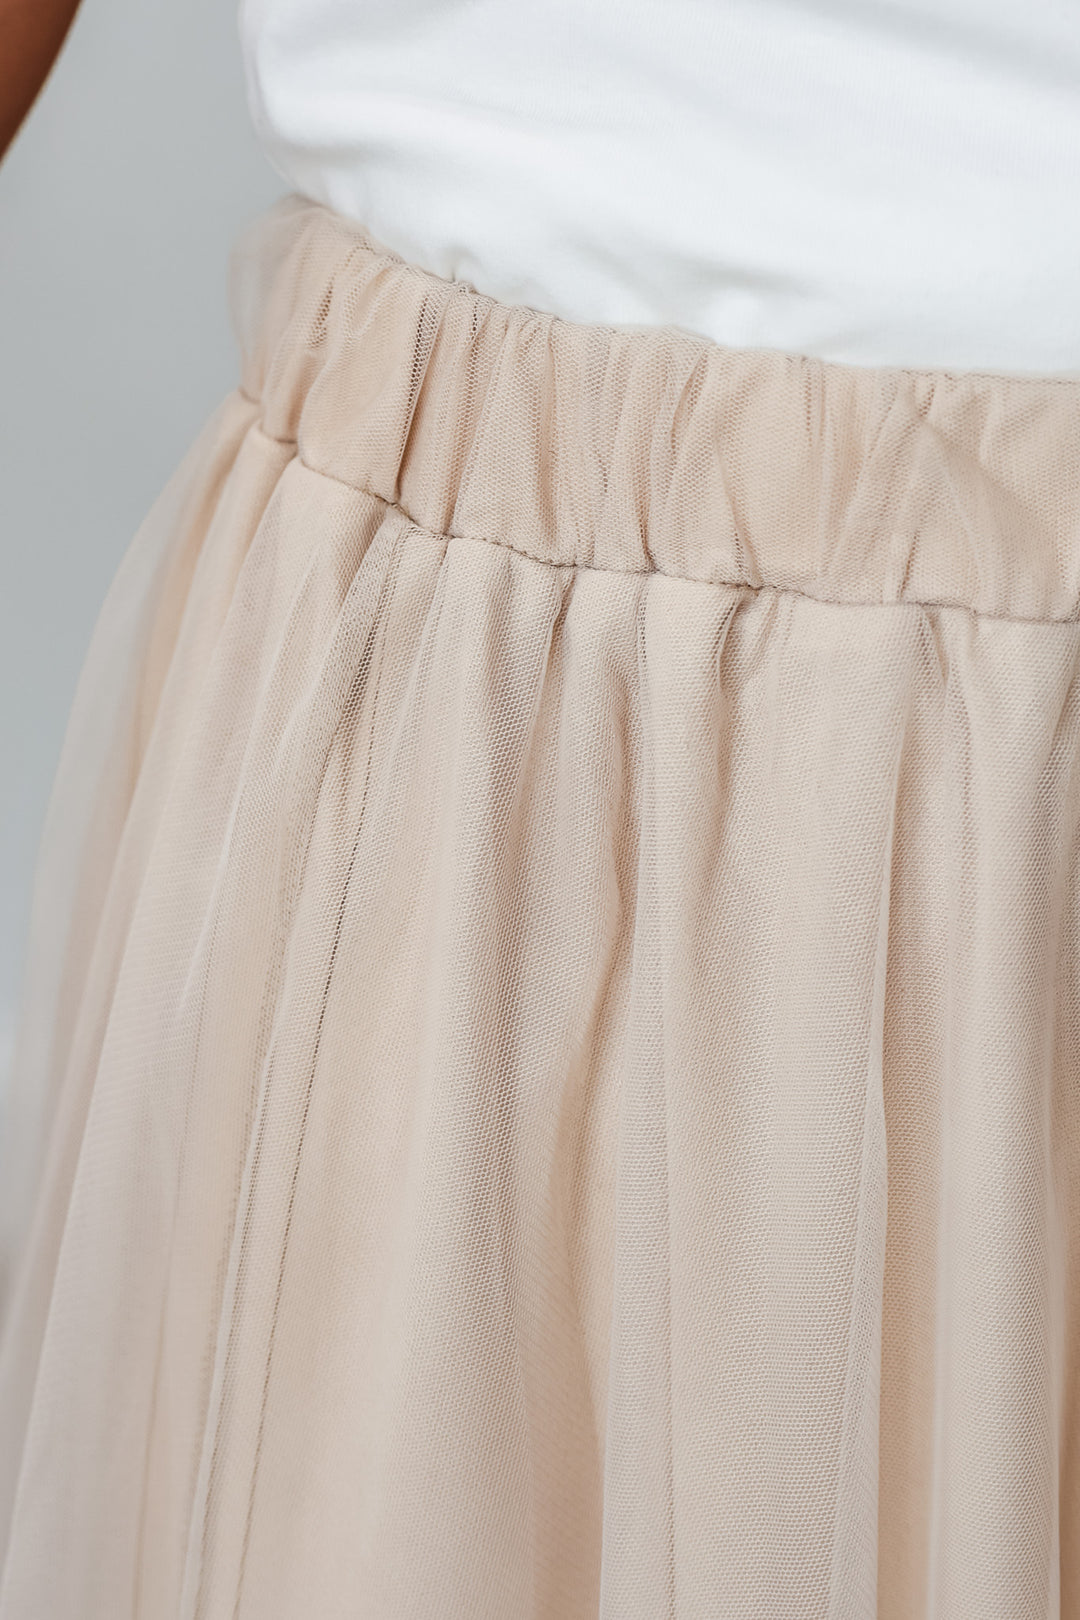 A closeup of a a woman wearing a champagne colored tulle skirt with an elastic waist.